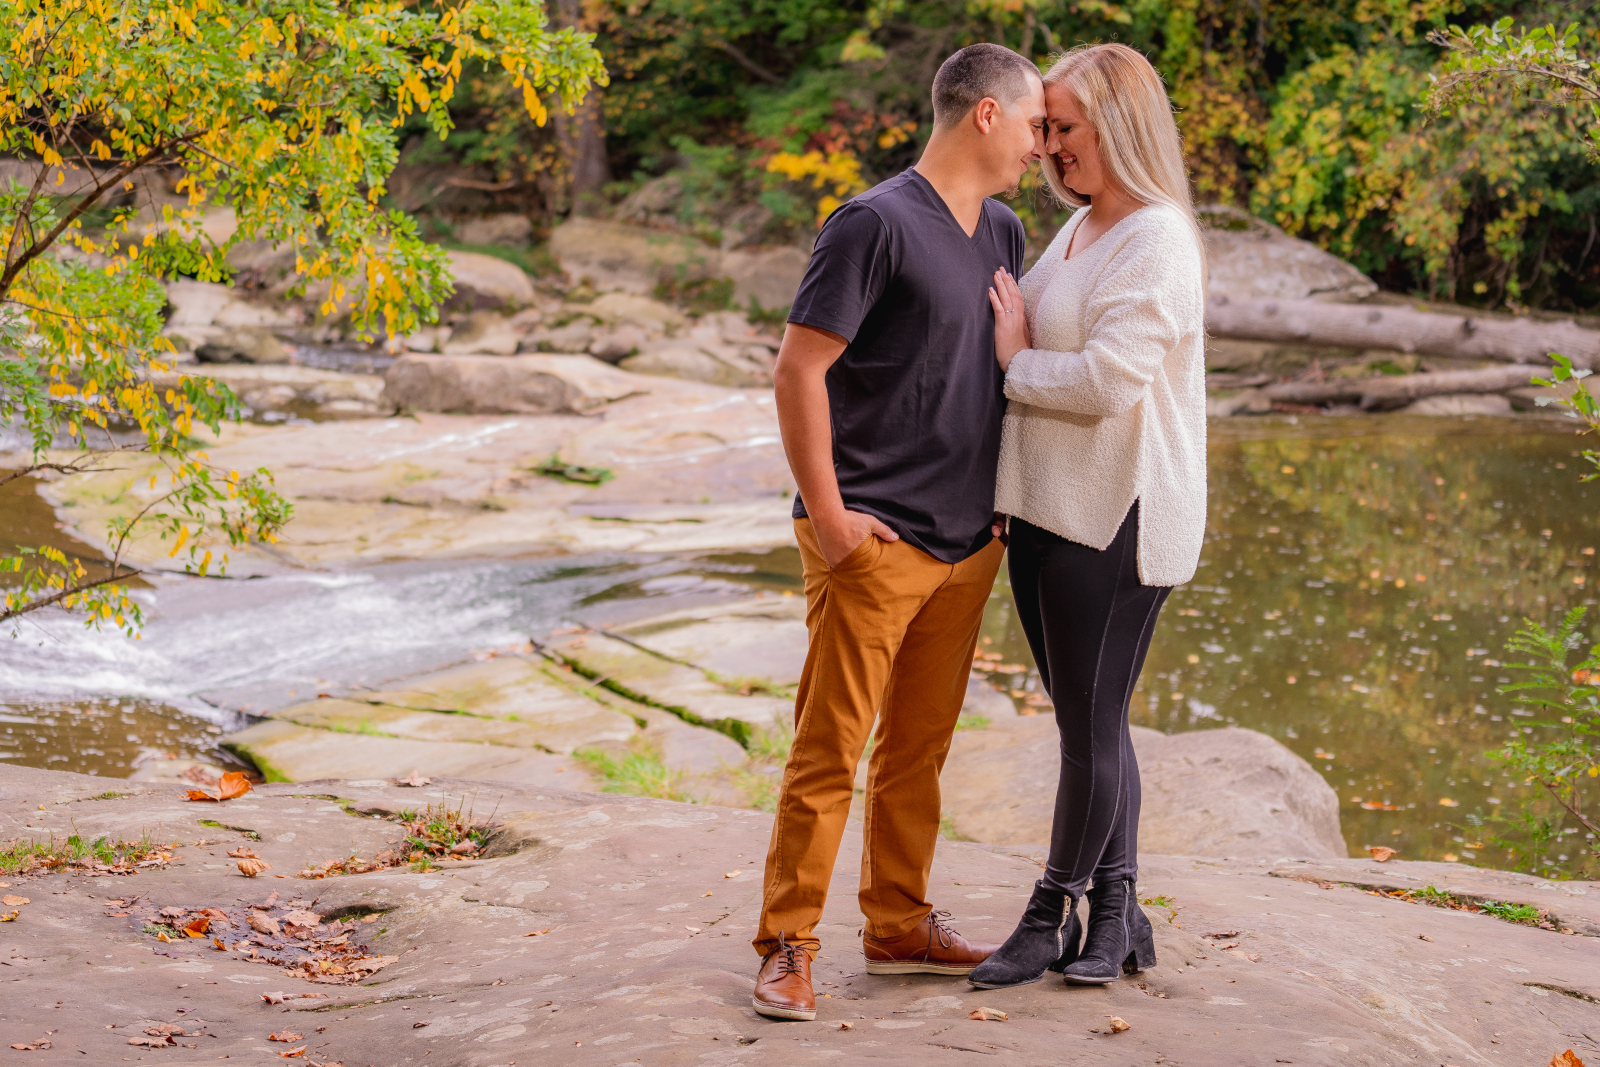 Man and woman fiancee engagement photo, couple portrait, romantic, creek, fall leaves, fall colors, trees, nature, outdoor fall engagement photo session at Grand Pacific Junction Historic Shopping District